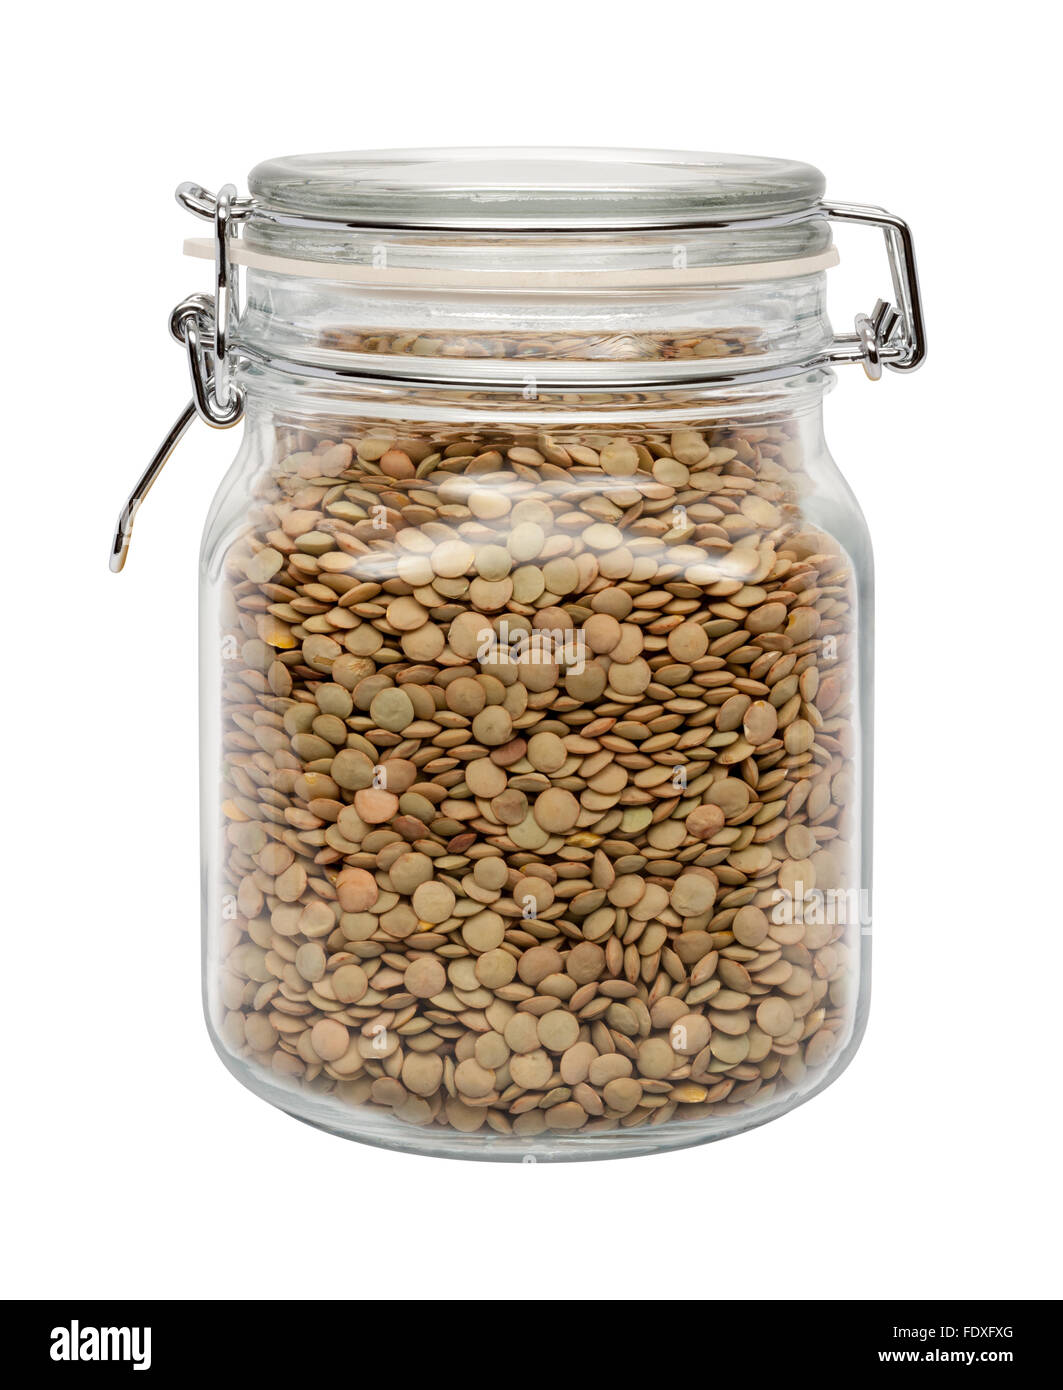 Lentils in a Glass Canister with a Metal Clamp. The image is a cut out, isolated on a white background. Stock Photo